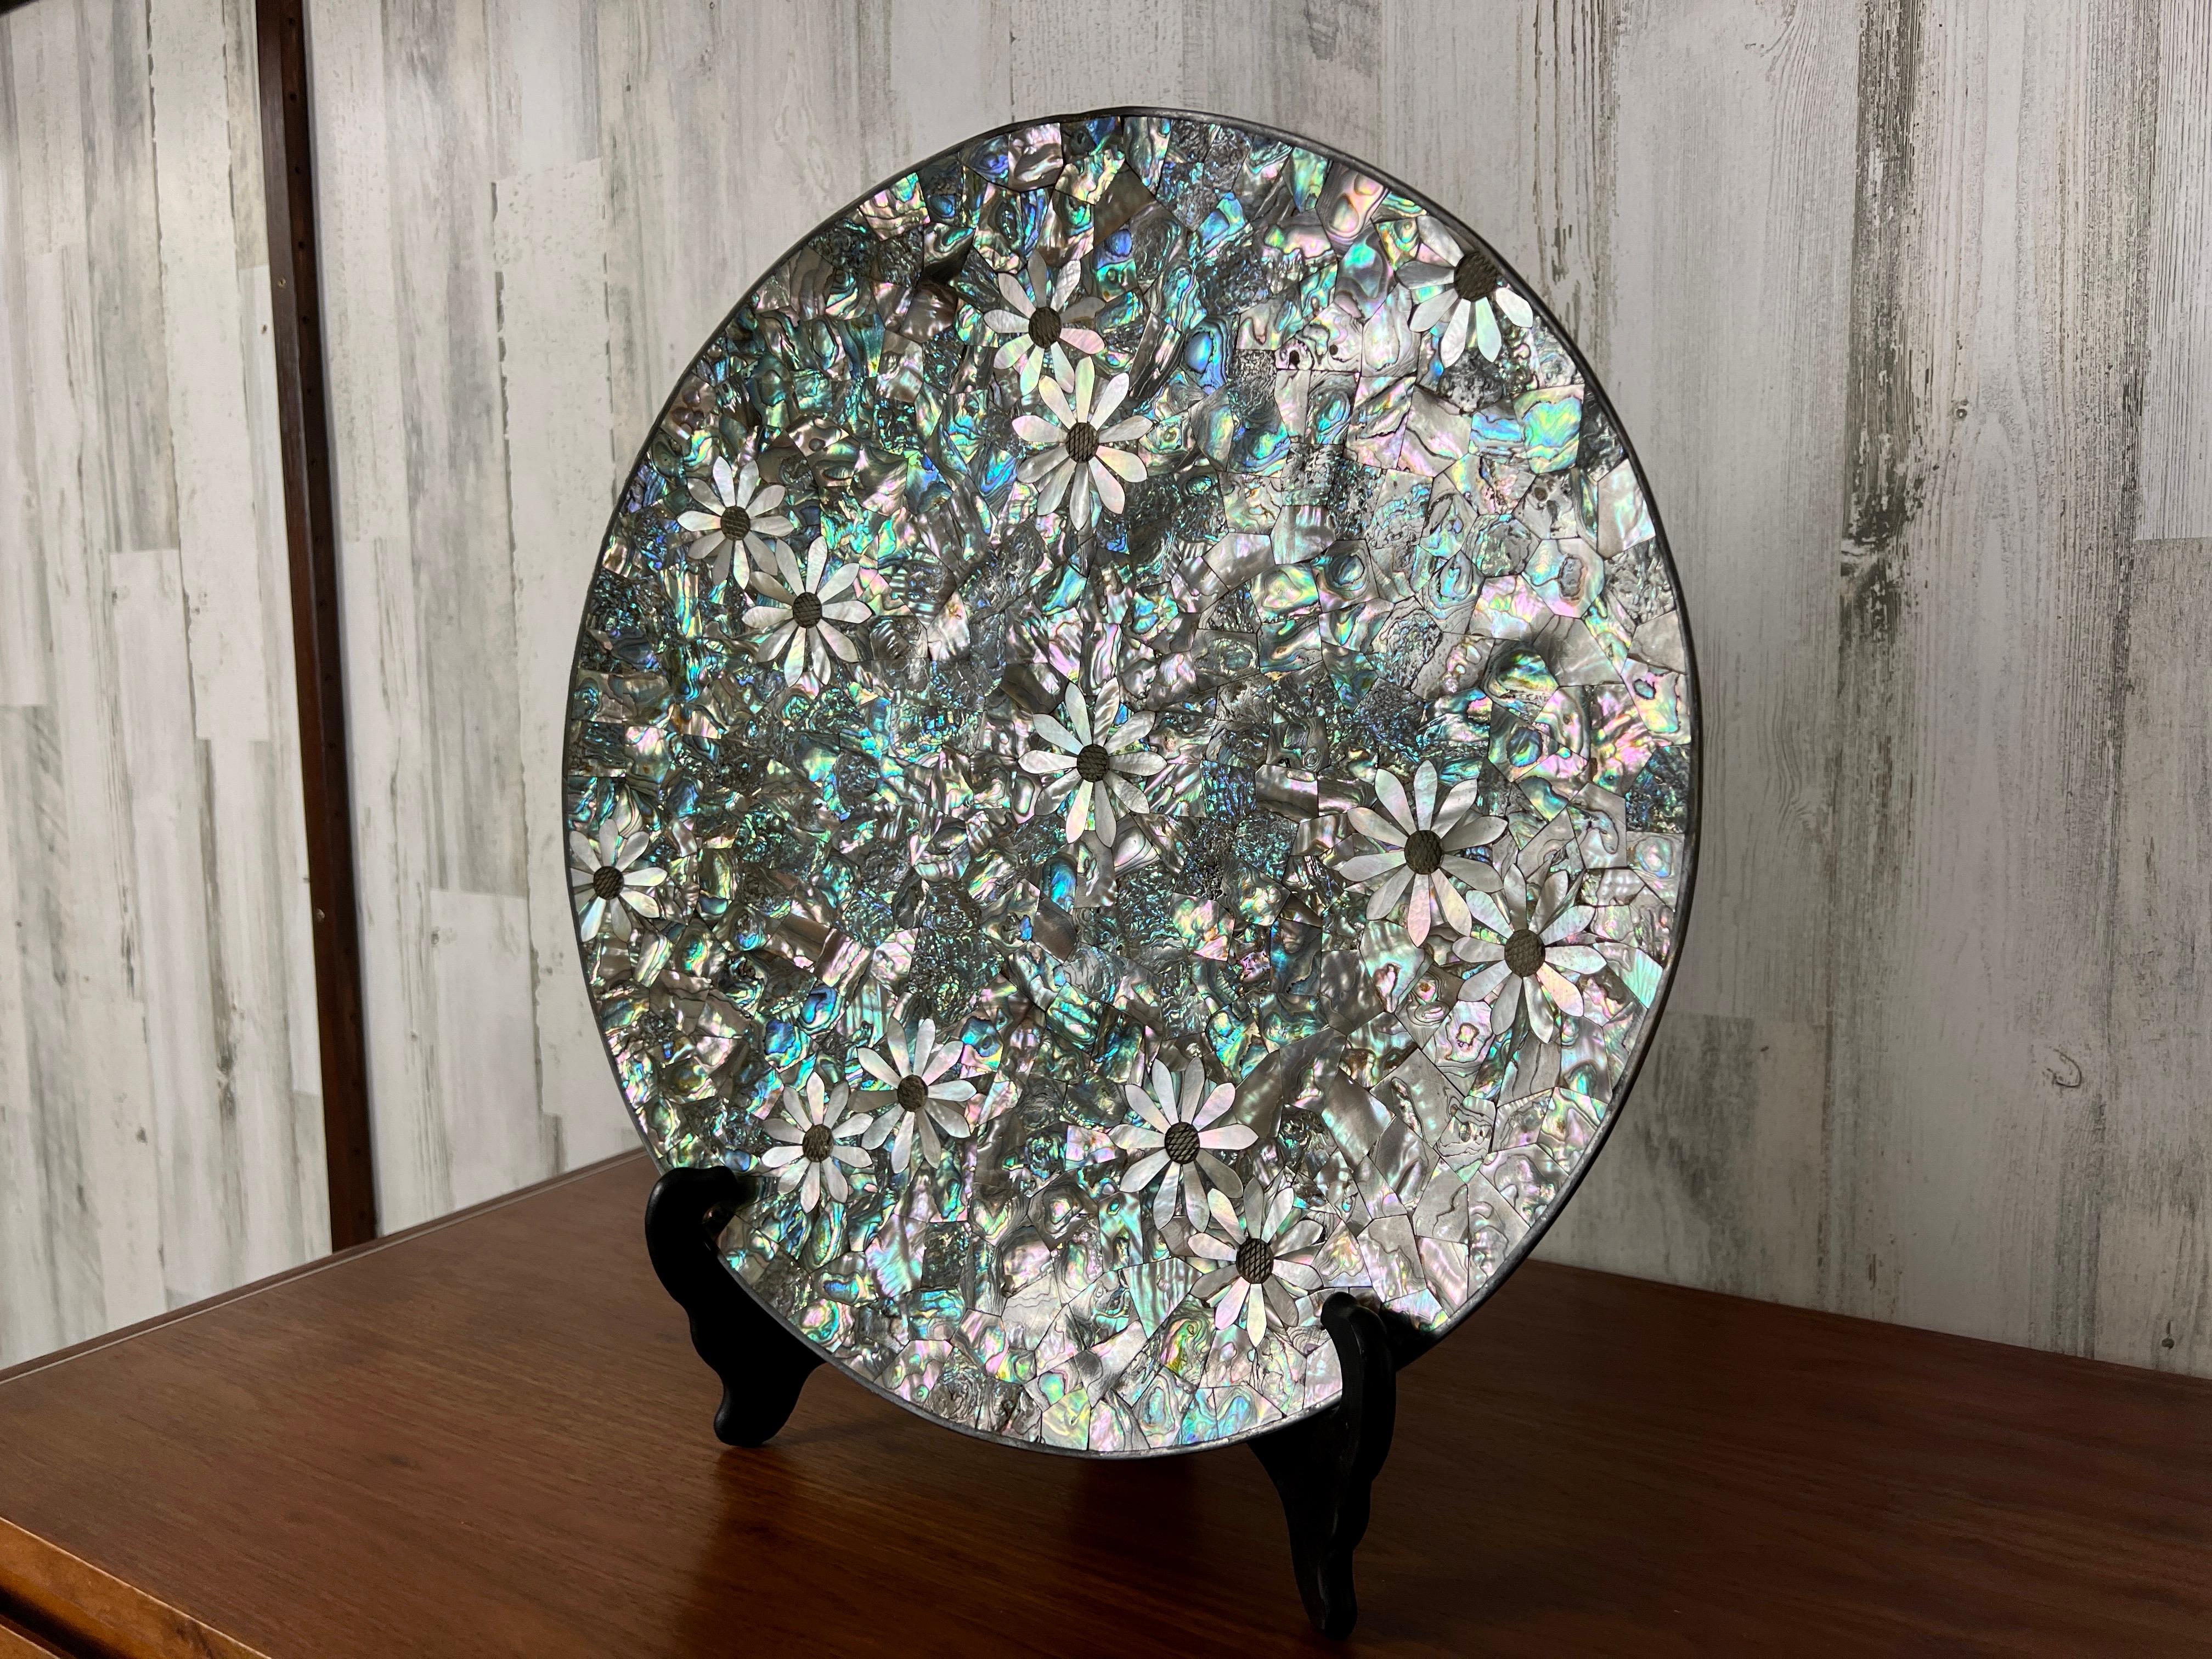 20th Century El Castillo Taxco Silver Plated Bowl with Abalone and Mother of Pearl Inlay